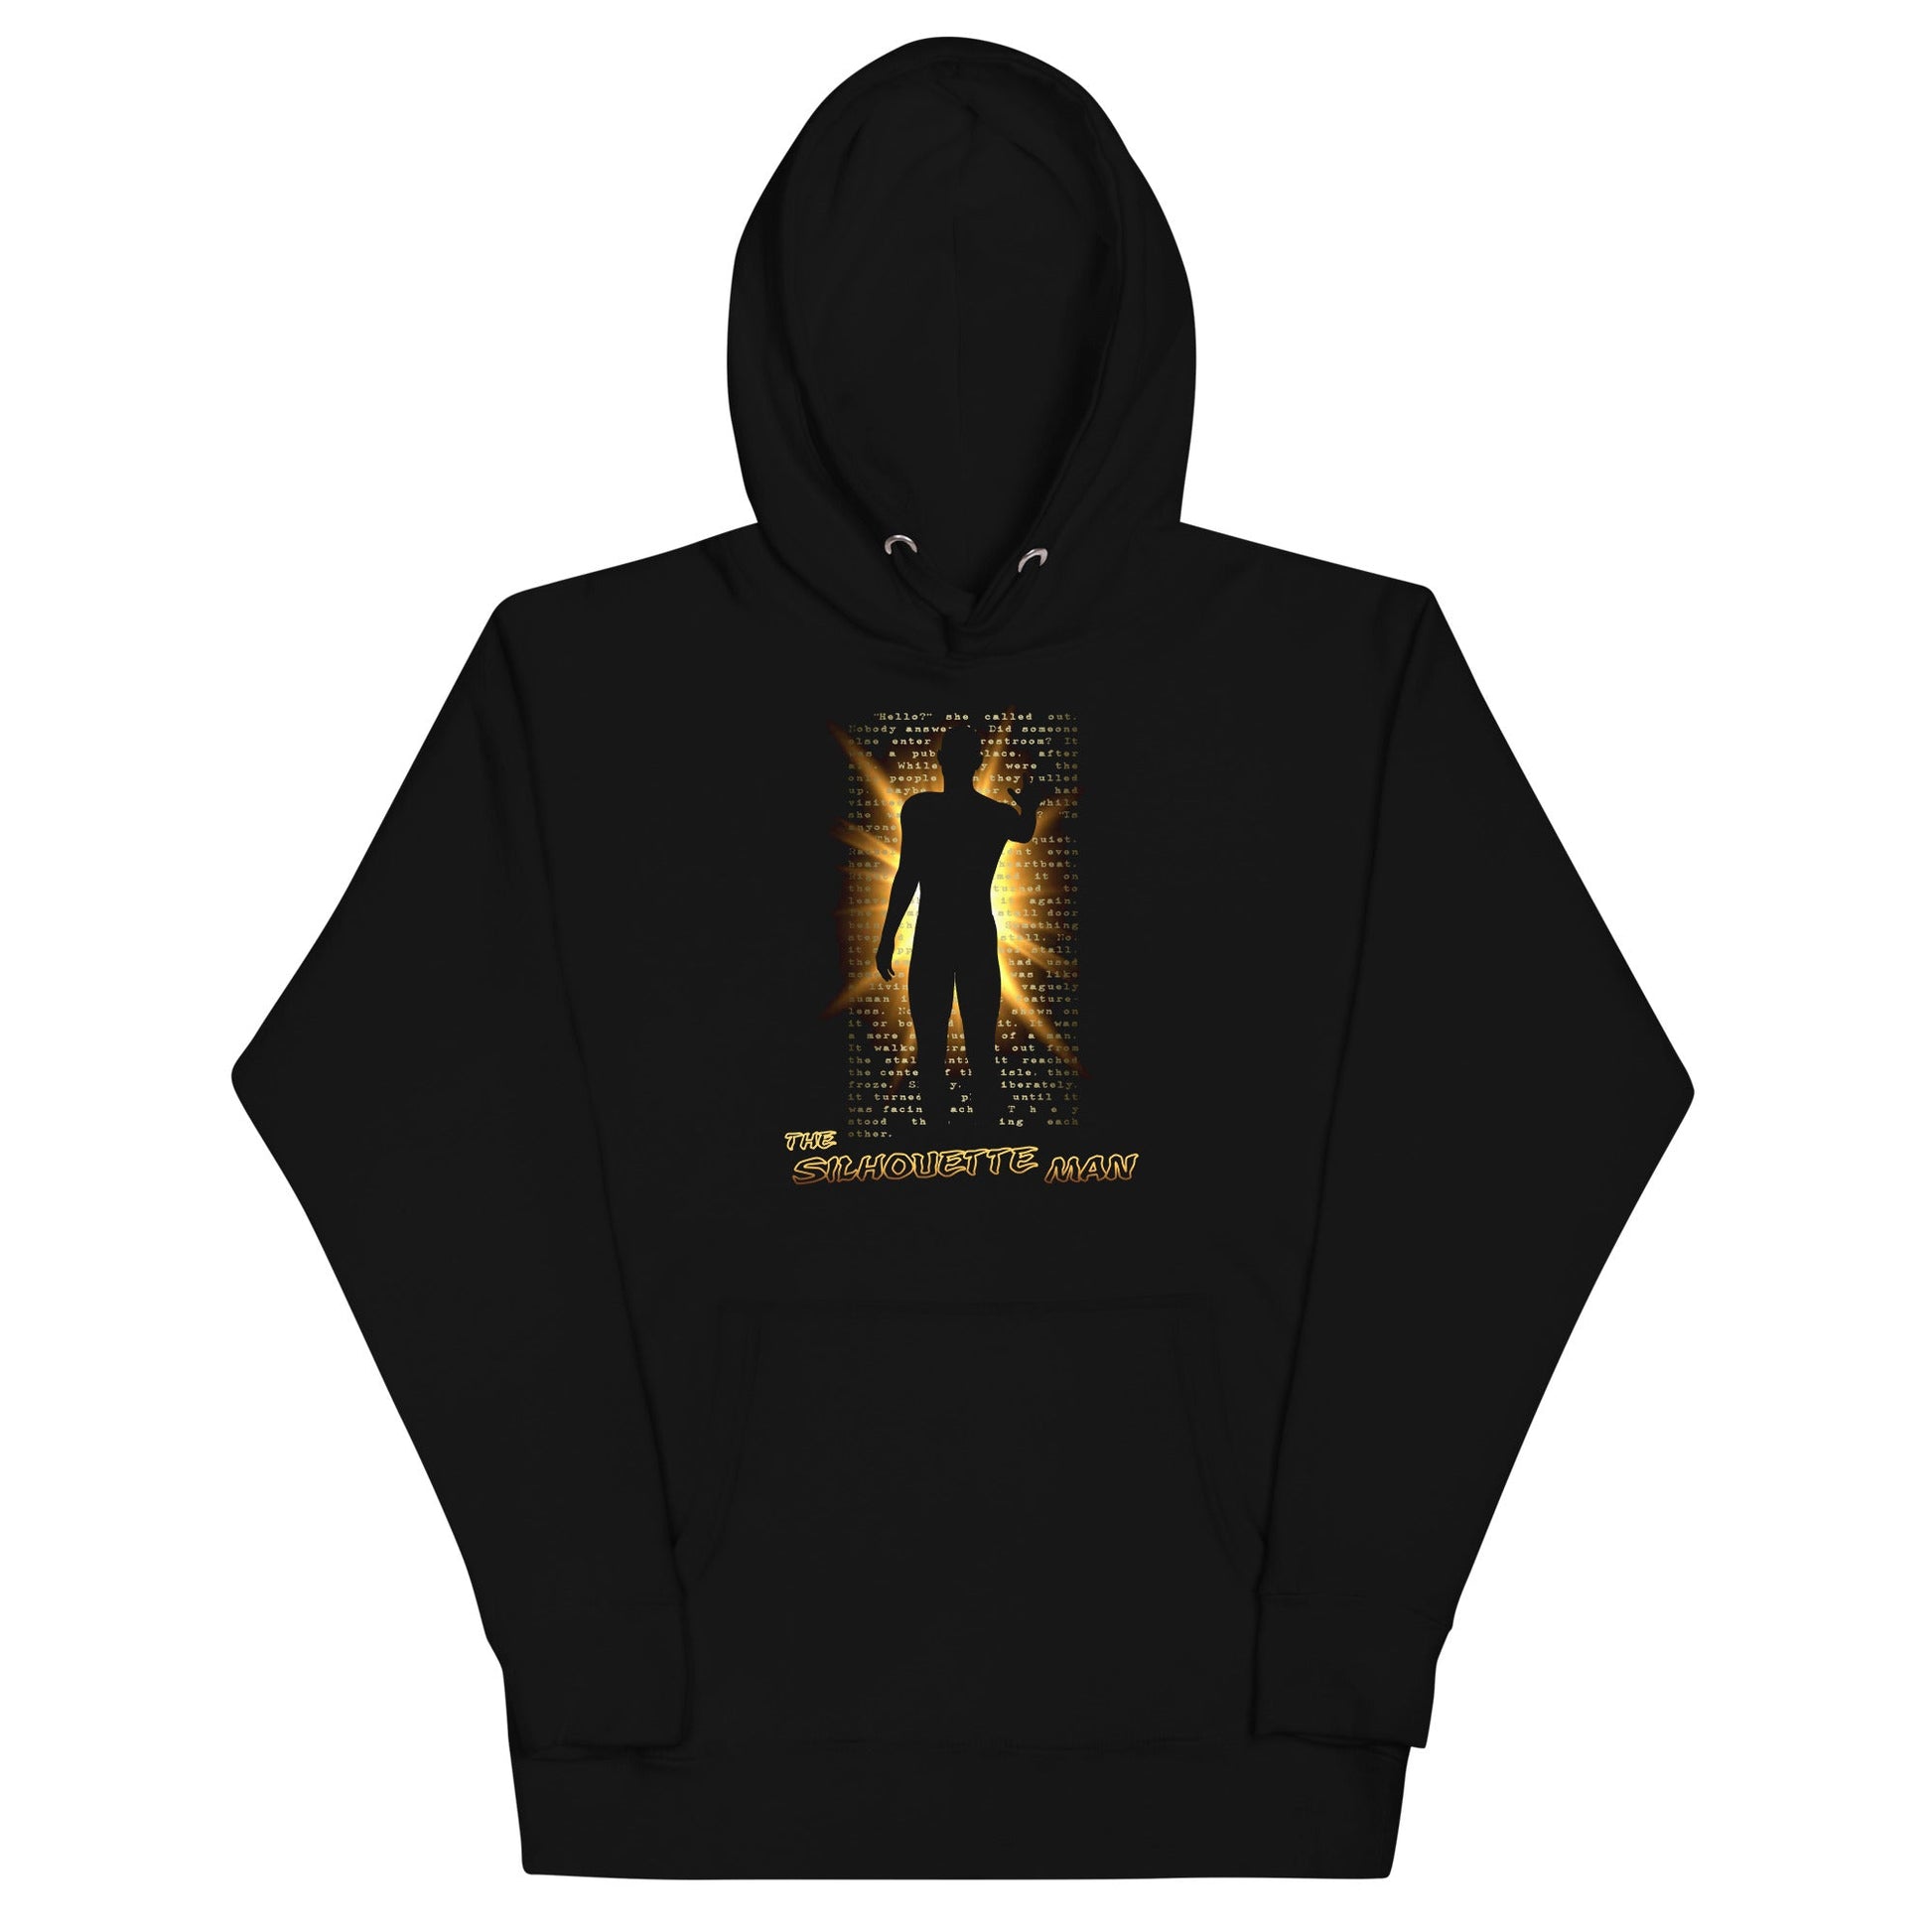 The Silhouette Man | Unisex Hoodie - Wrap Yourself in Shadows - Spectral Ink Shop - Sweaters and Hoodies -9110021_10779